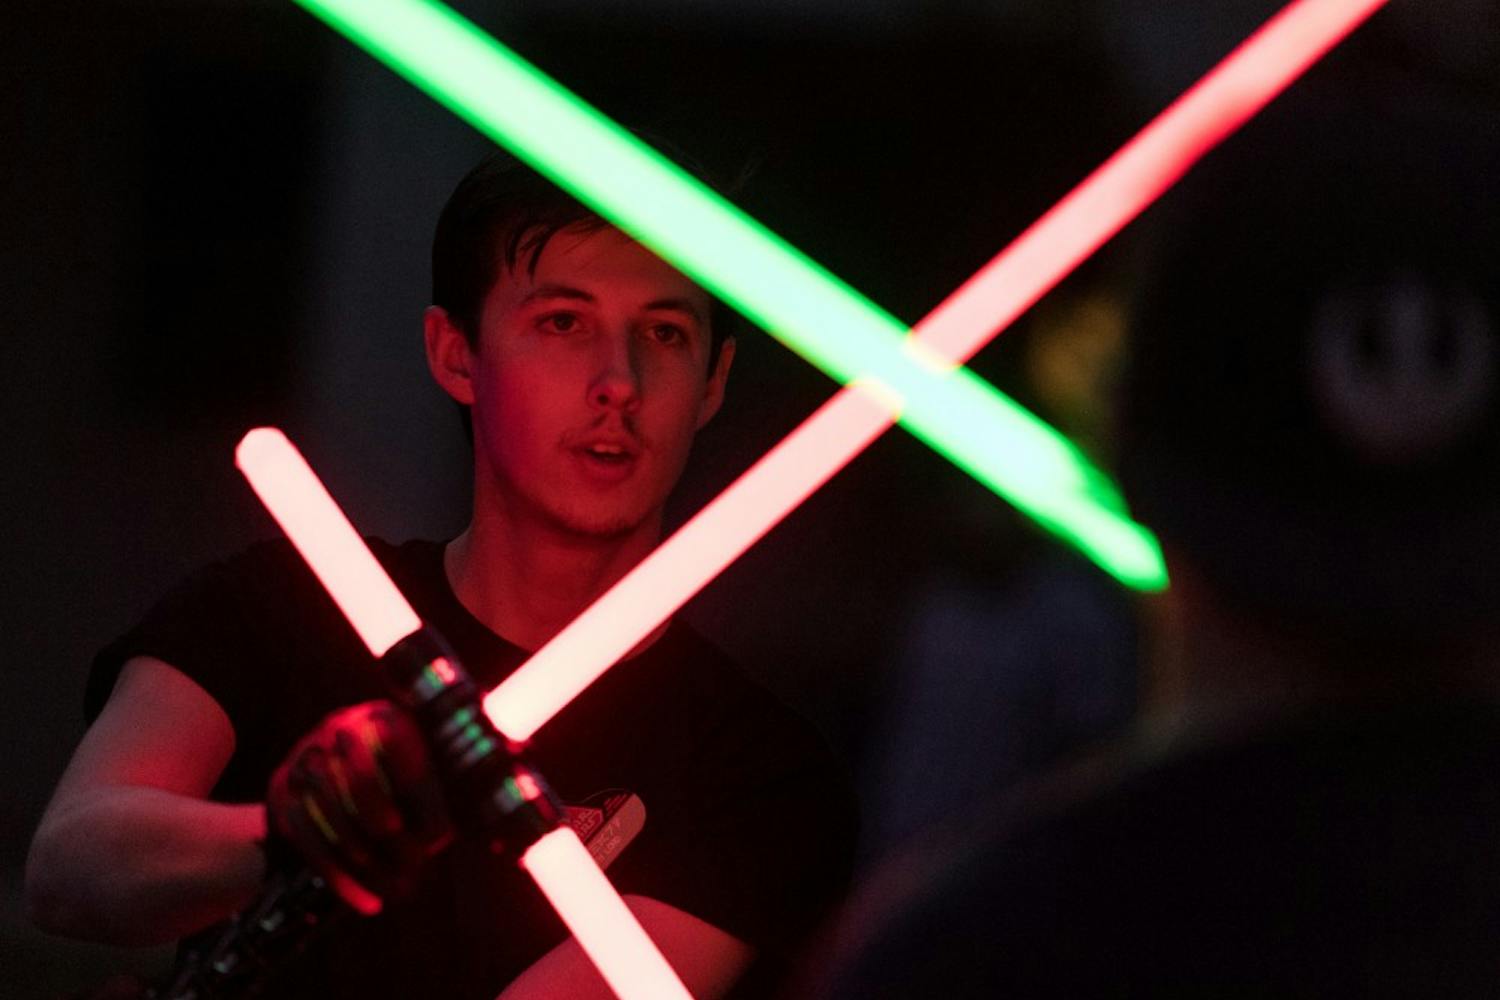 Richard Bannon, an economics major at Scottsdale Community College, gives new light saber participants tips on how to improve their fighting techniques at the ASU Light Saber club meeting held at the Secret Garden on the ASU Tempe Campus on Tuesday, Aug. 23, 2016.